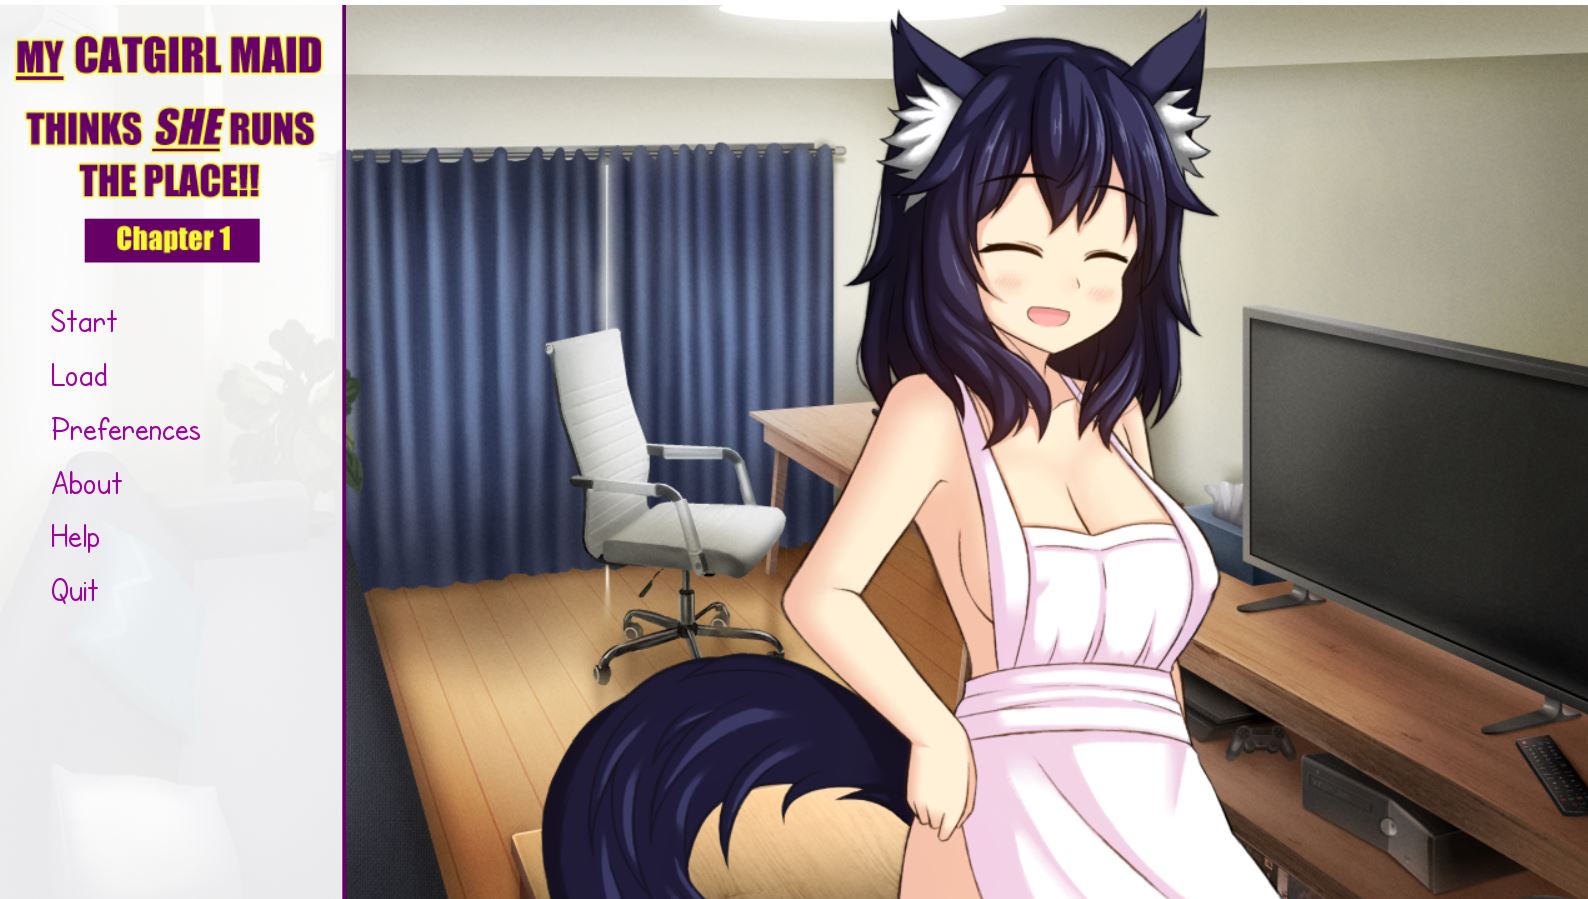 My Catgirl Maid Thinks She Runs the Place - free game download, reviews,  mega - xGames